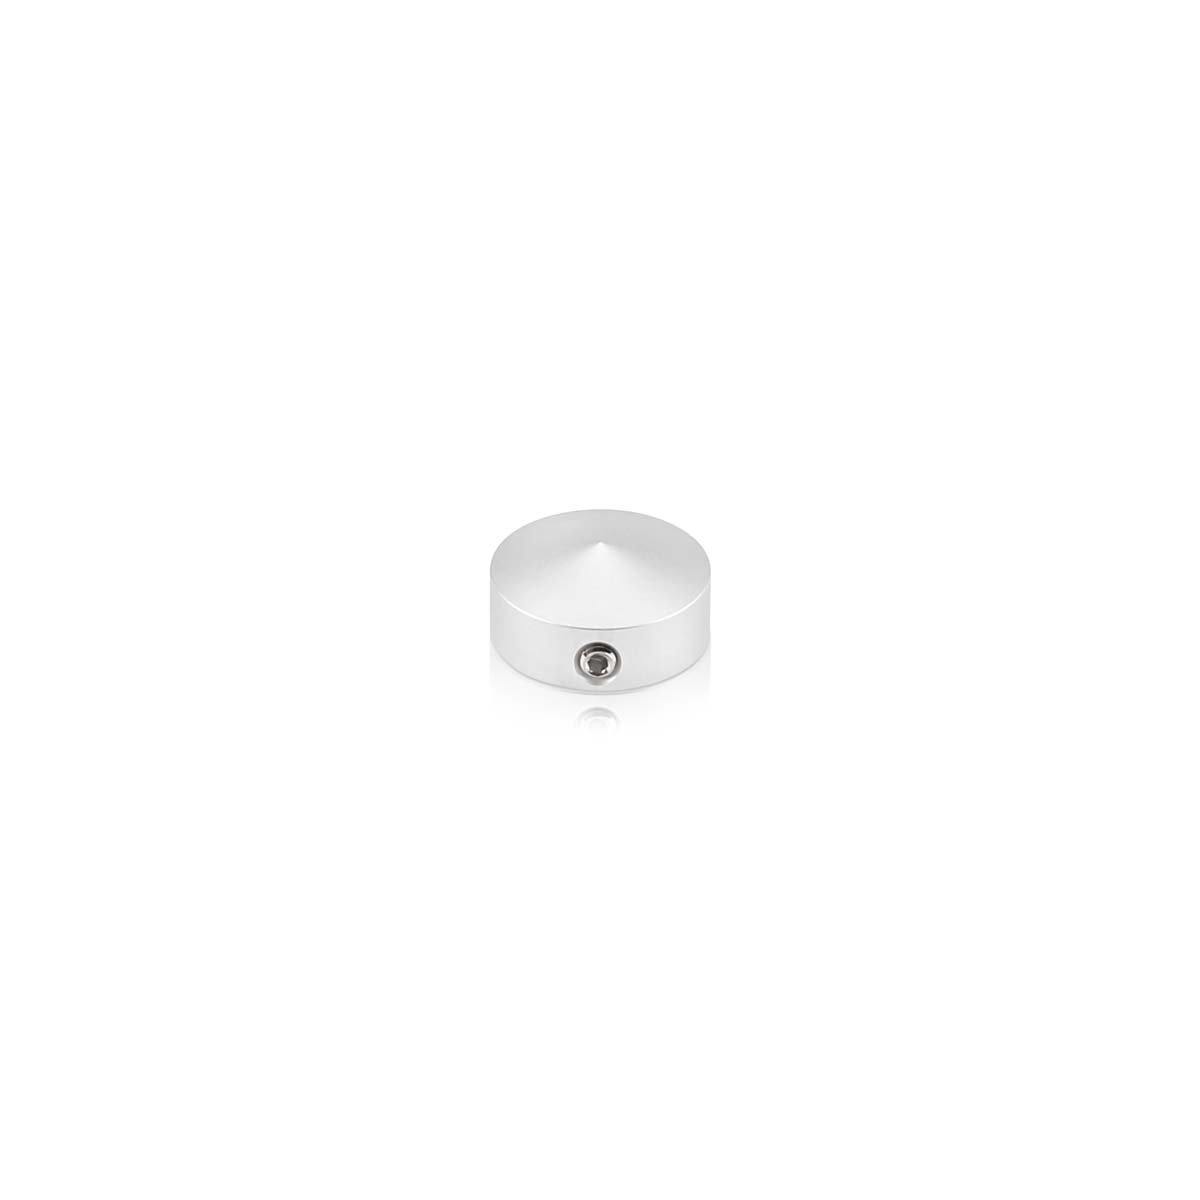 Set of 4 Conical Locking Screw Cover, Diameter: 11/16'' (Less 3/4''), Aluminum Clear Anodized Finish (Indoor or Outdoor Use)